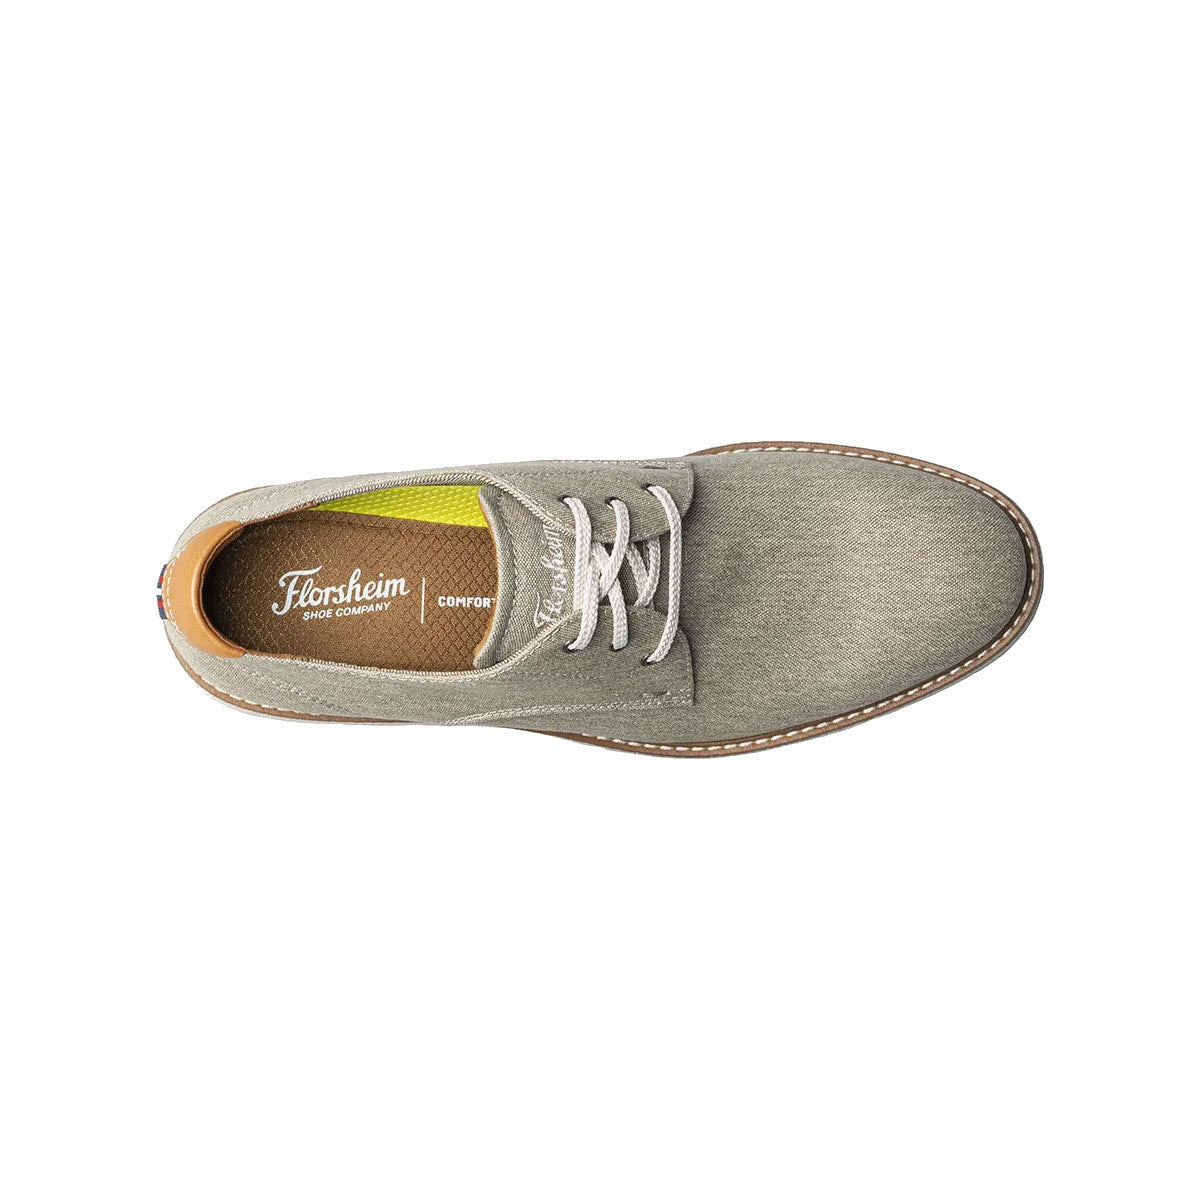 Top view of a Florsheim Vibe Canvas plain toe oxford taupe shoe with white laces and a green inner lining.